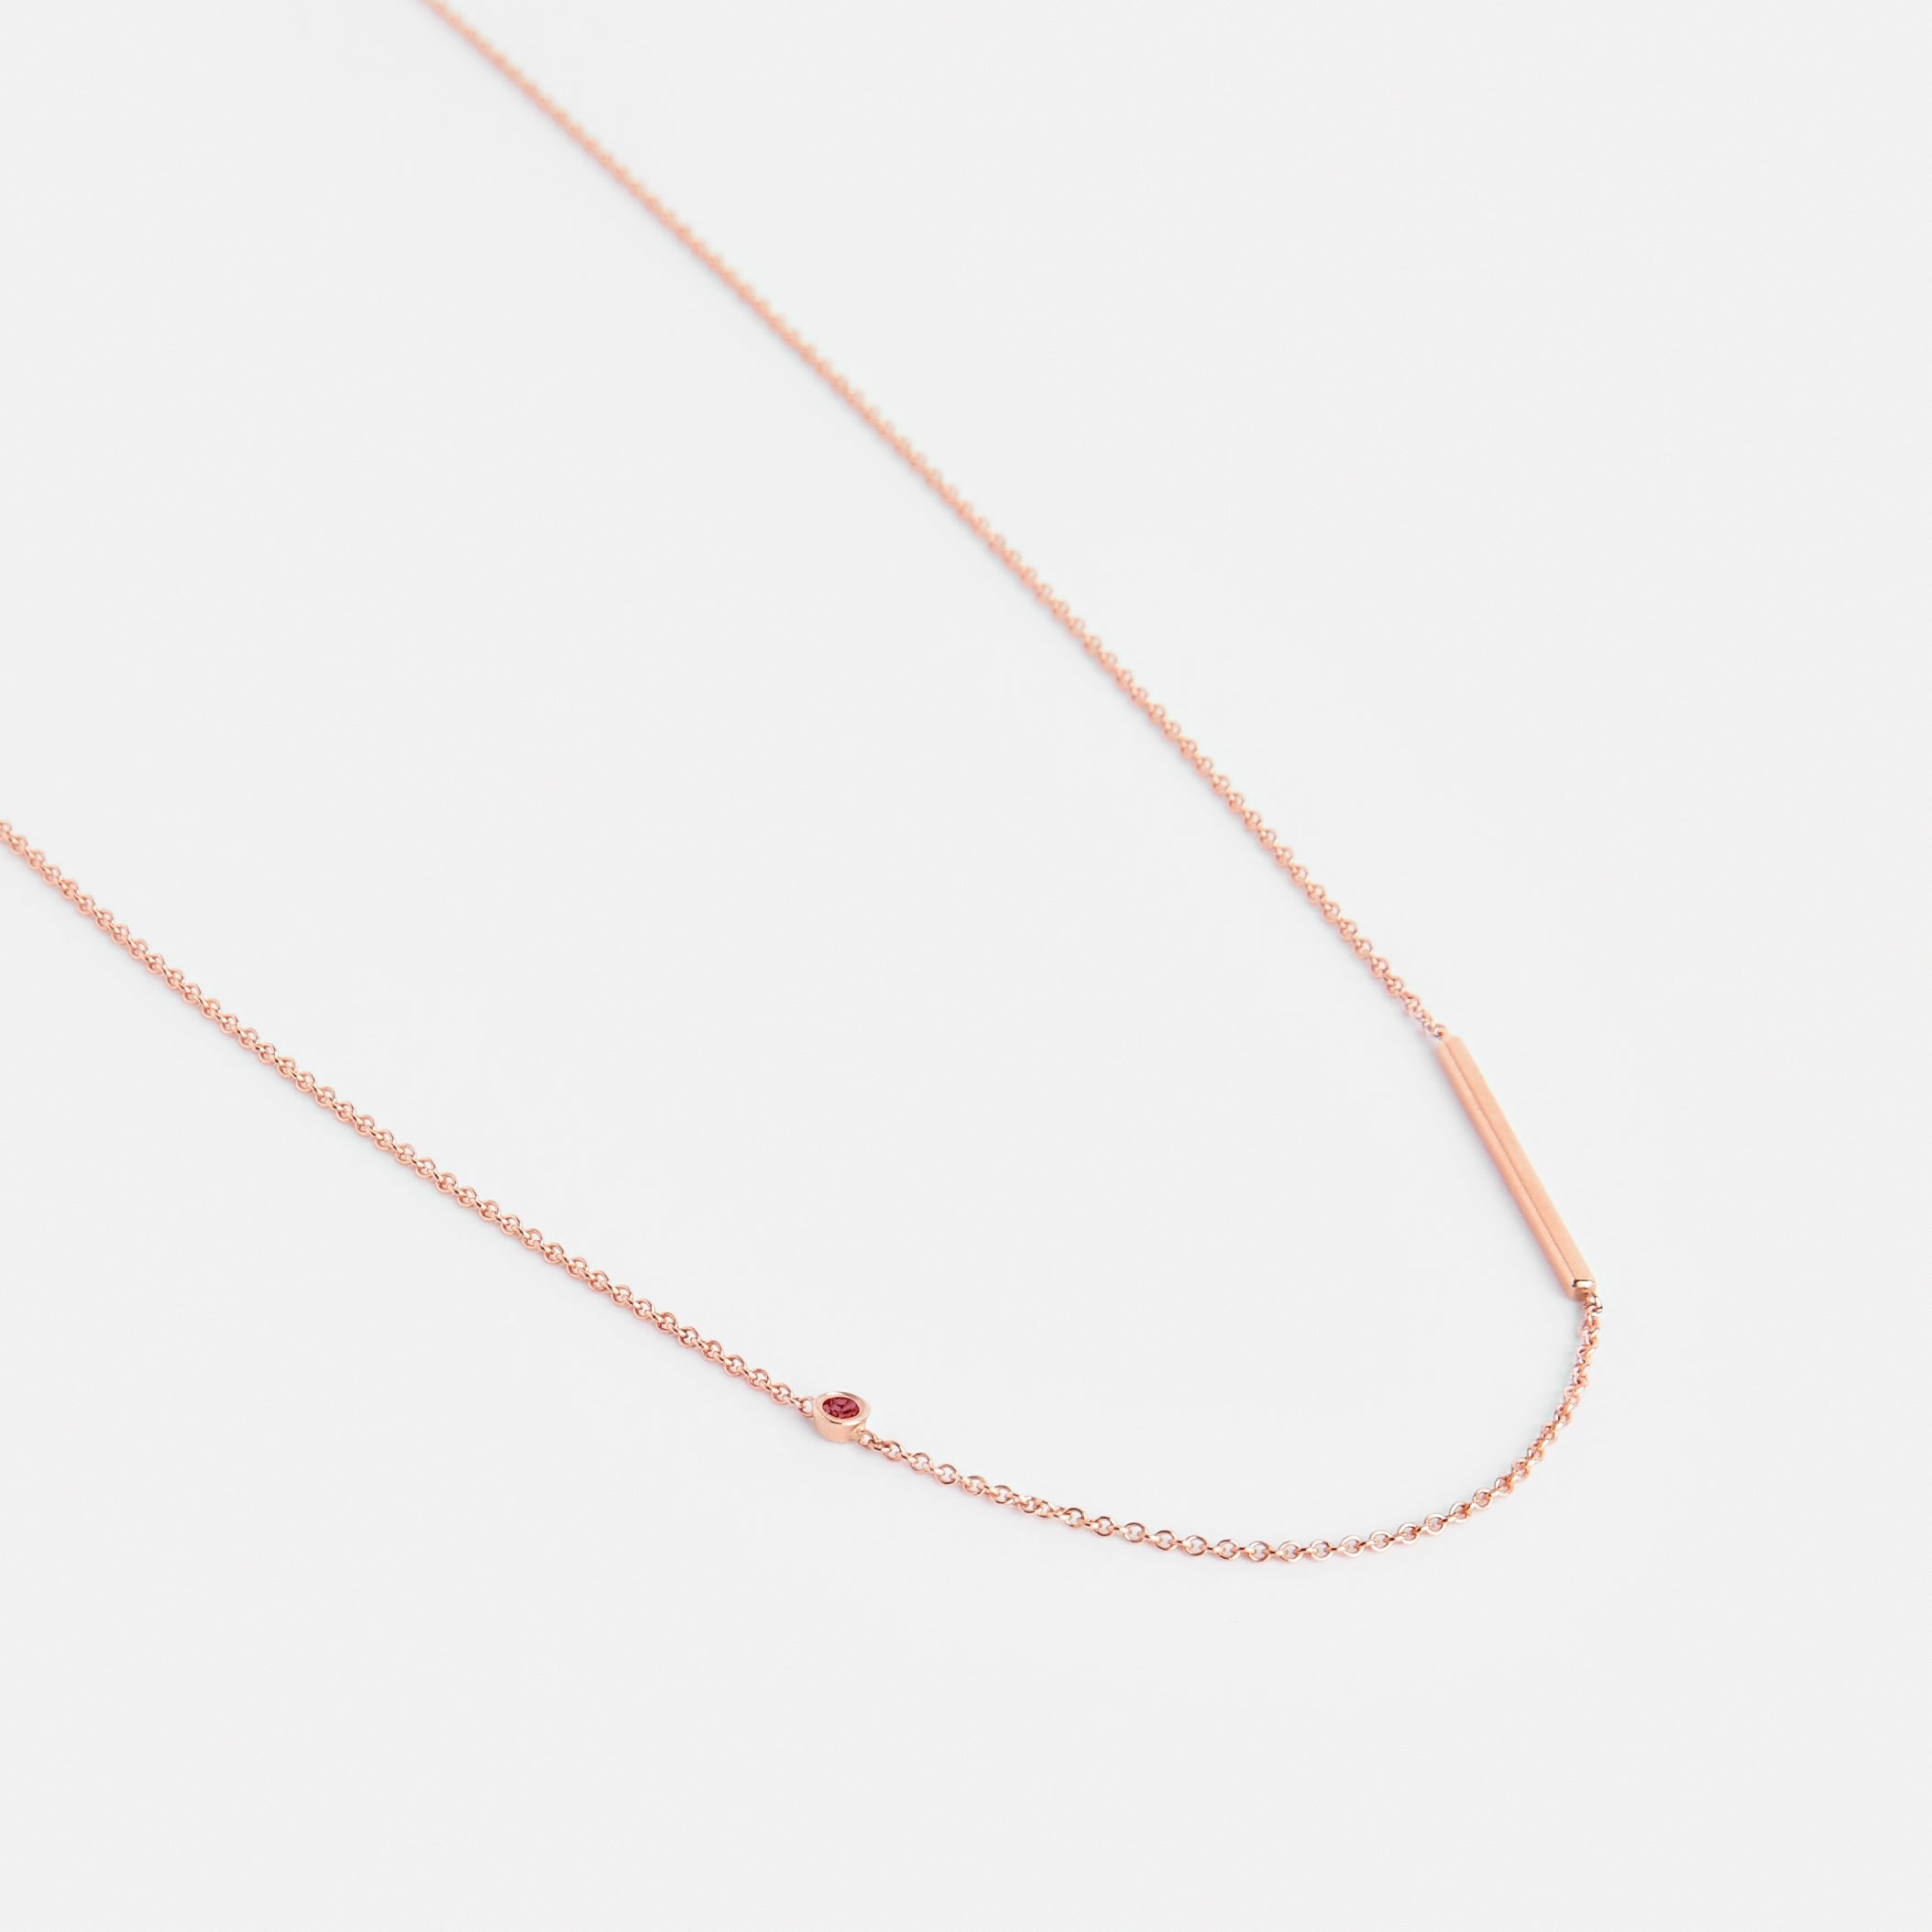 Iki Thin Necklace in 14k Gold set with Ruby By SHW Fine Jewelry NYC